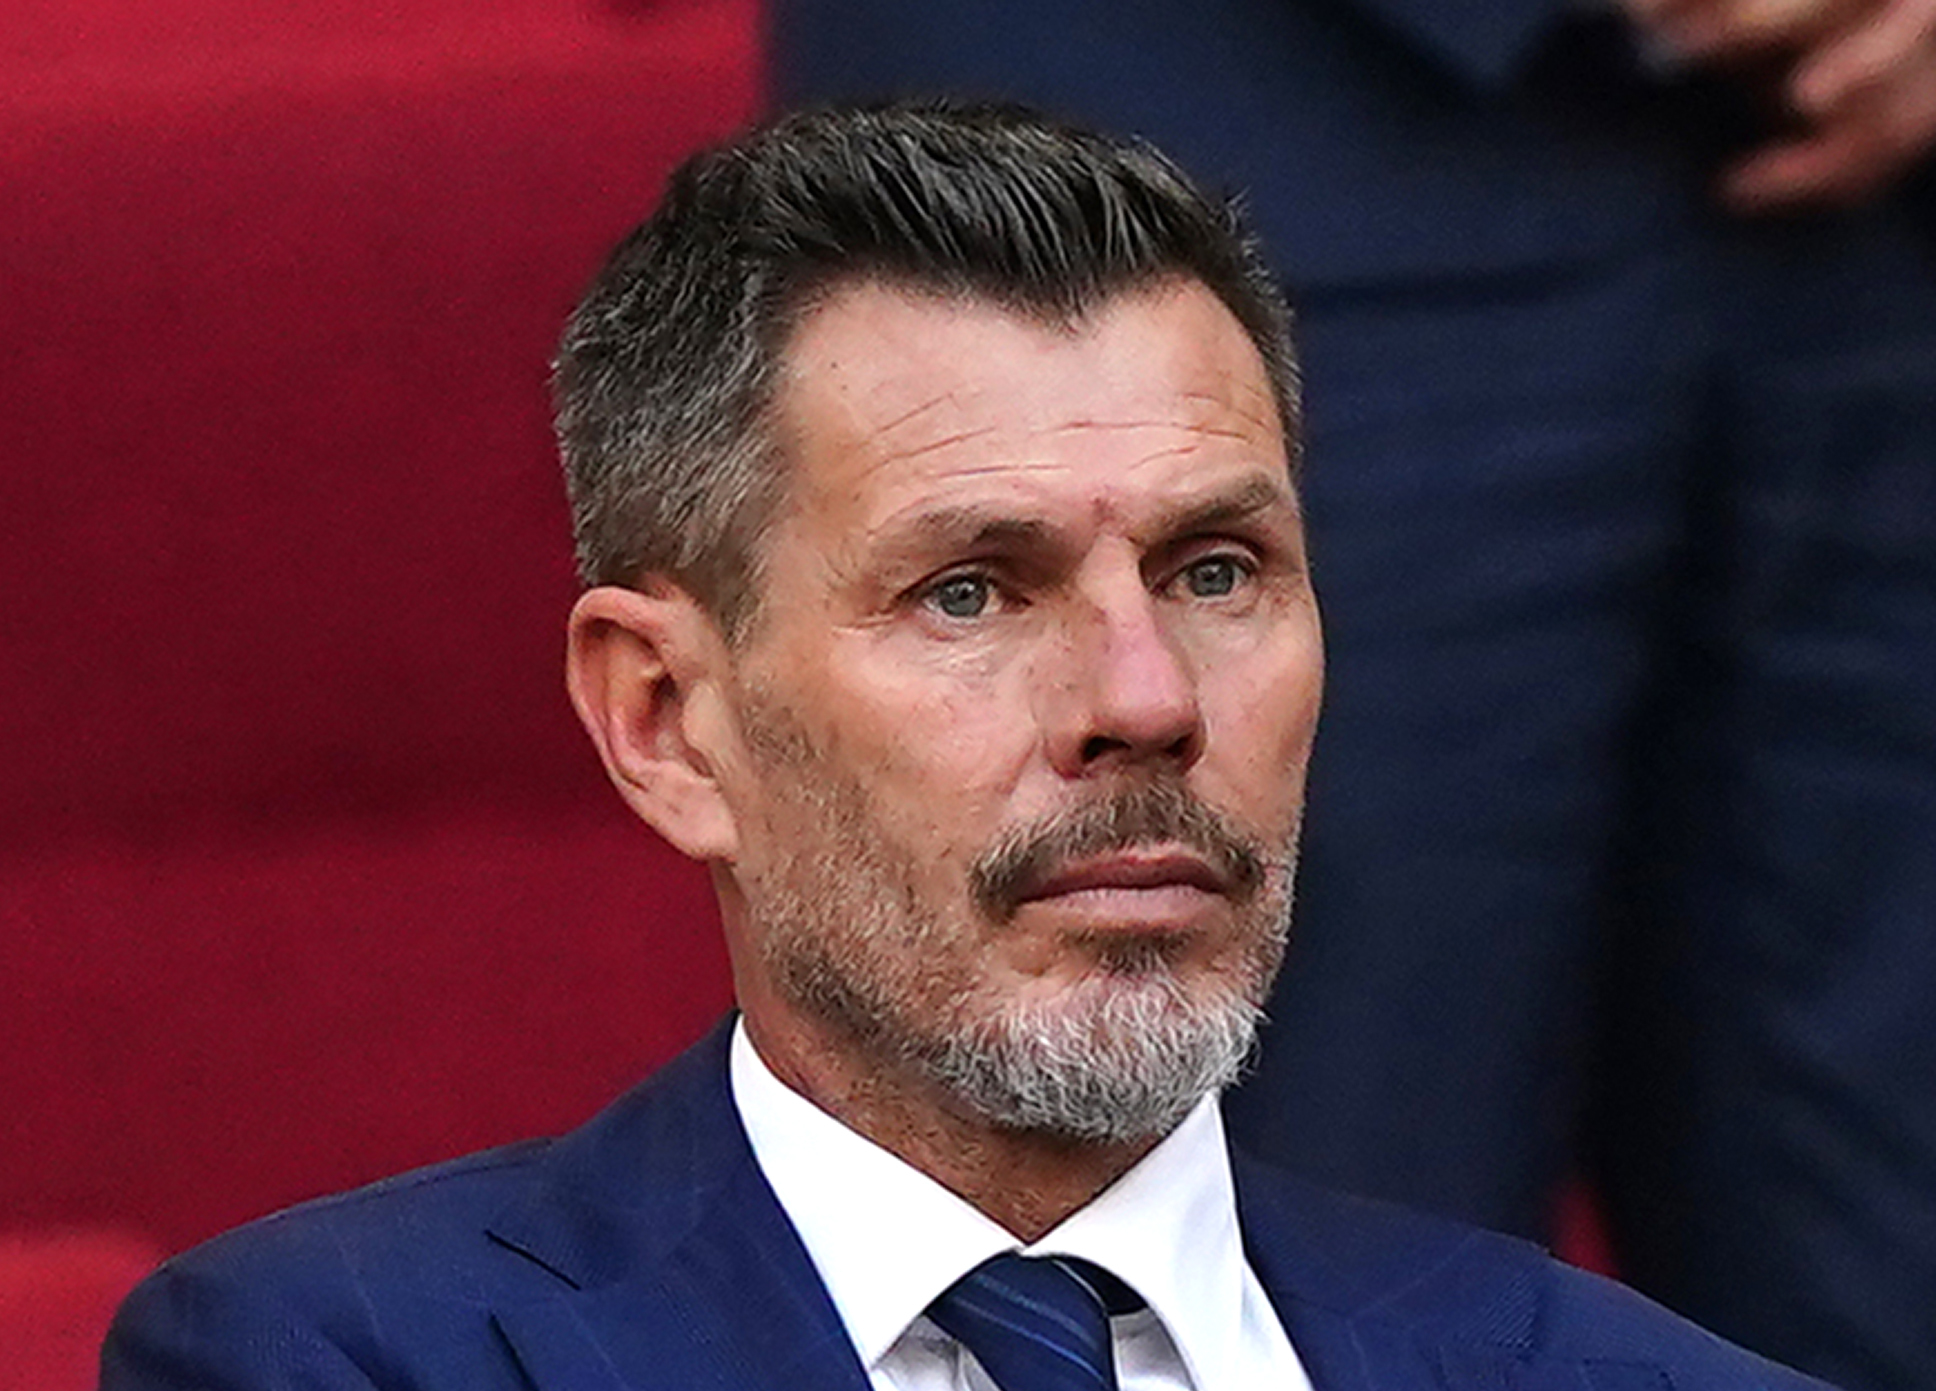 Zvonimir Boban quit UEFA last month over the proposal on term limits